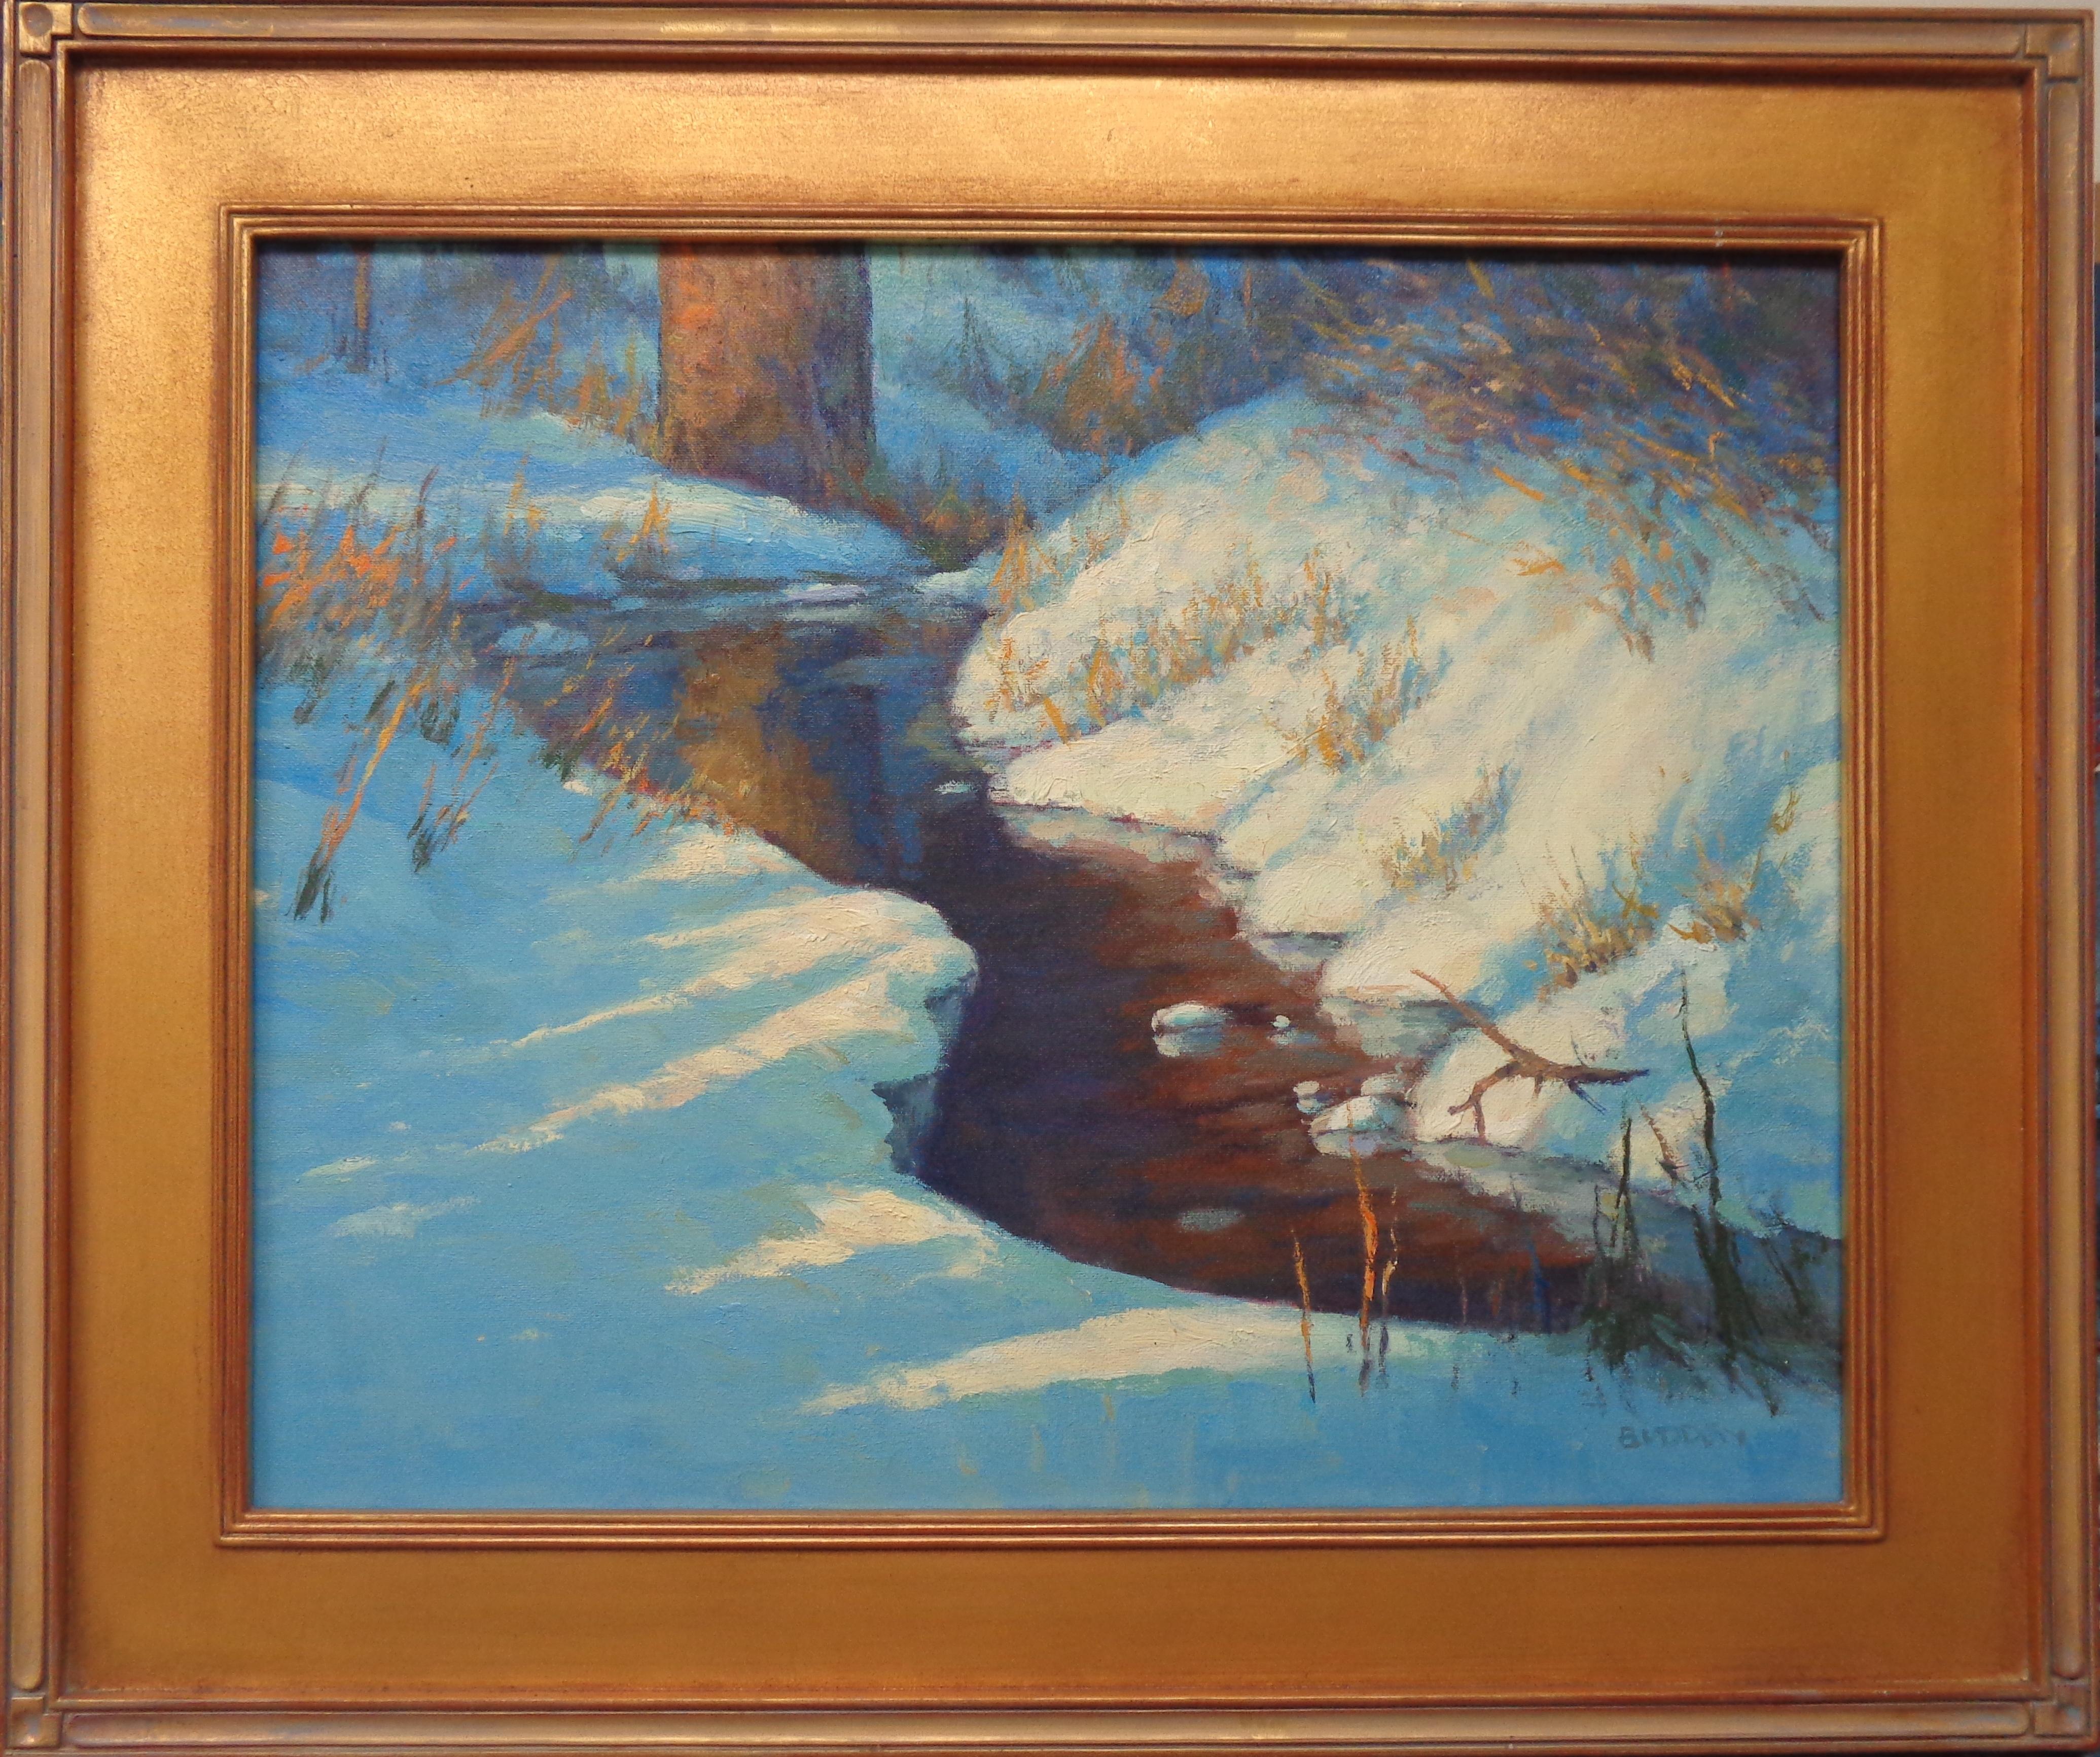 An oil painting on canvas by award winning contemporary artist Michael Budden that showcases a winter stream caught by the light. The image measures 16 x 20 and 21.5 x 25.5 framed.  Painting is in good condition and the frame shows some light